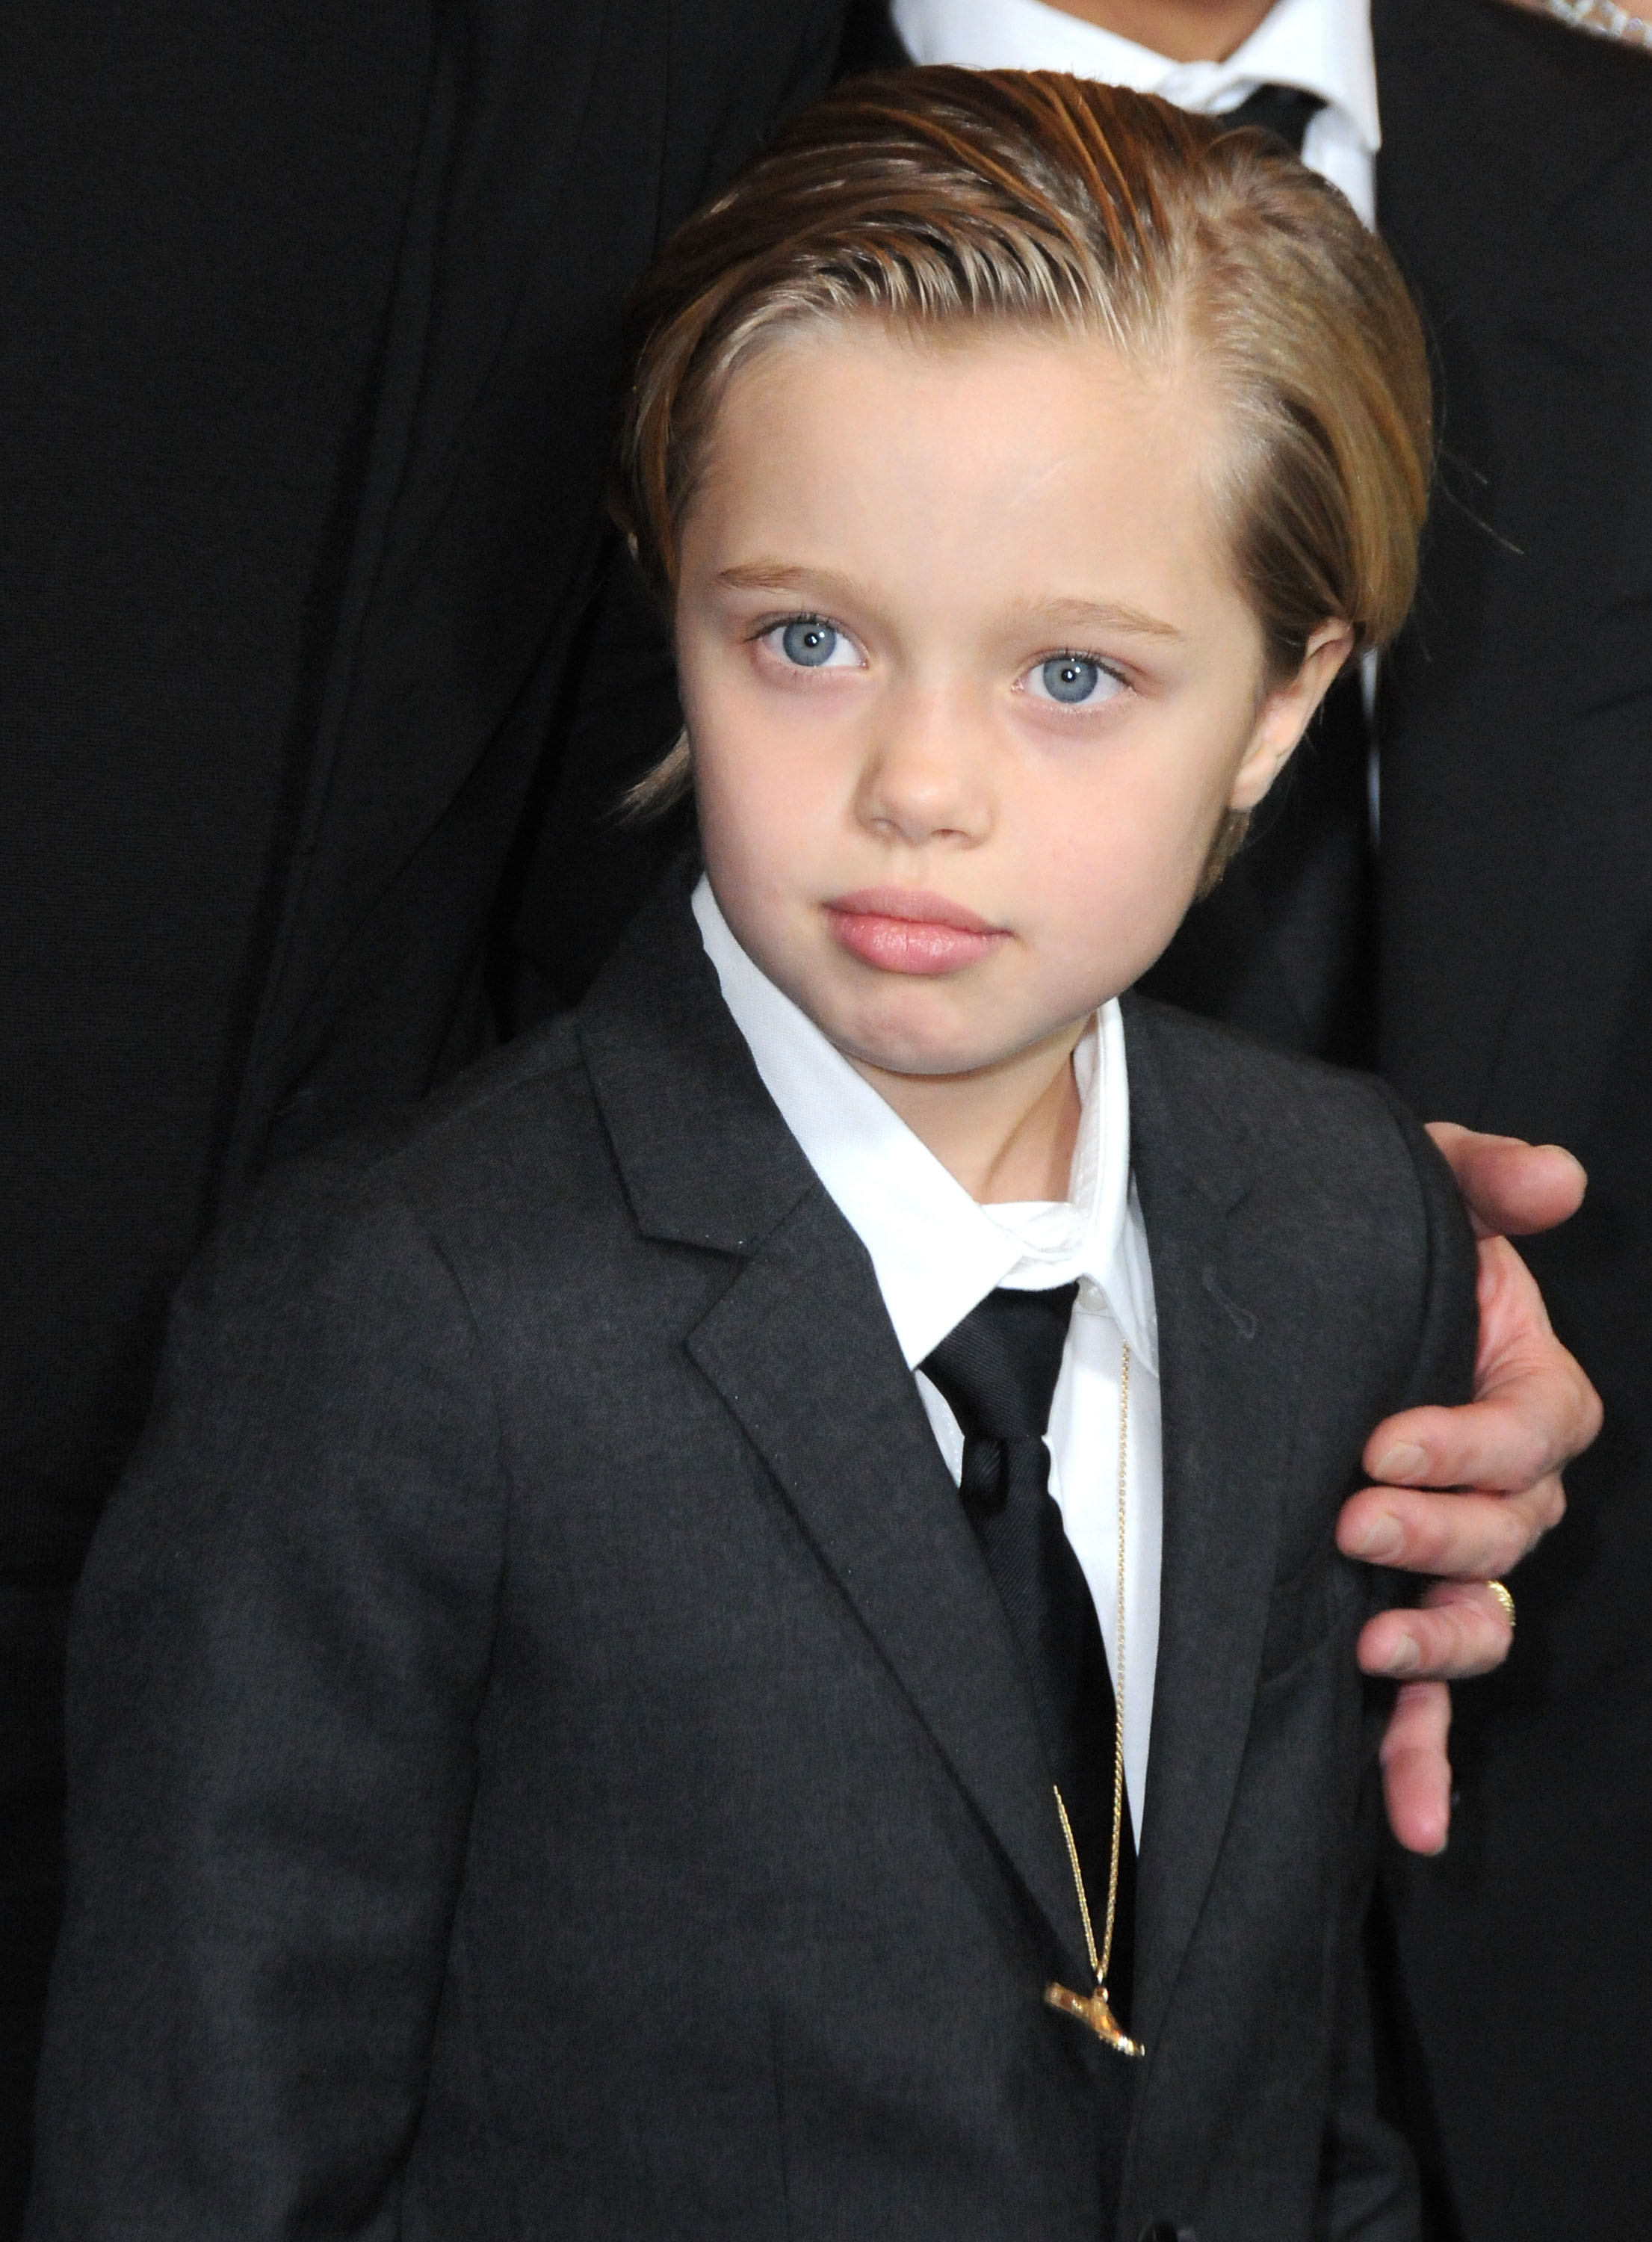 Shiloh Nouvel Jolie-Pitt at the premiere of 'Unbroken' at TCL Chinese Theatre IMAX on December 15, 2014 in Hollywood, California. | Source: Getty Images